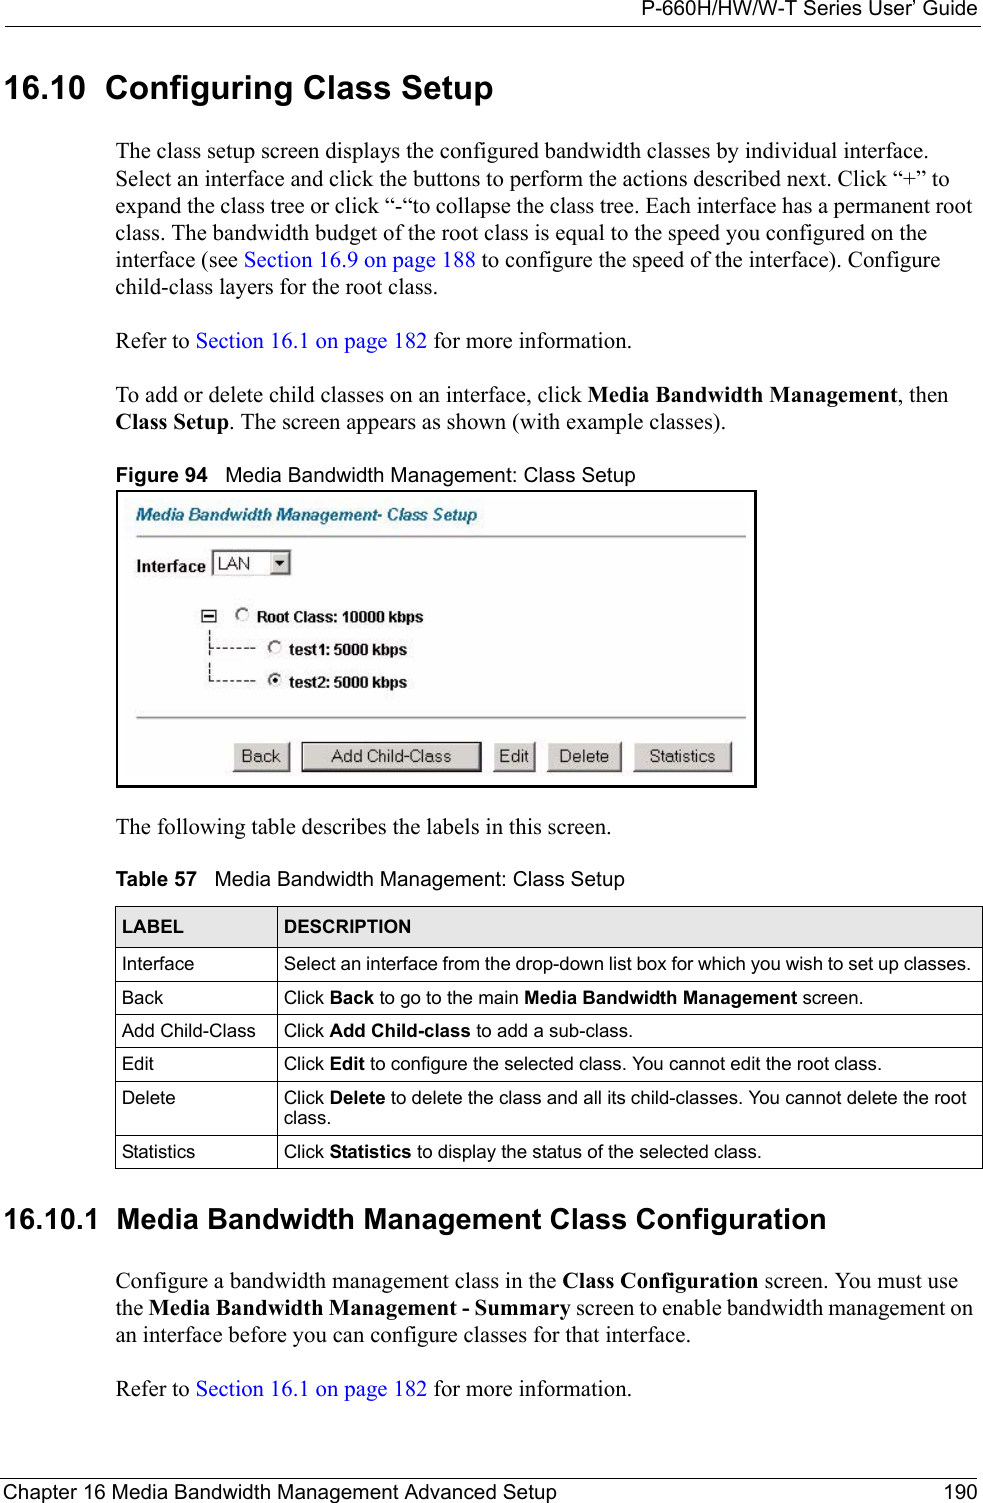 P-660H/HW/W-T Series User’ GuideChapter 16 Media Bandwidth Management Advanced Setup 19016.10  Configuring Class Setup  The class setup screen displays the configured bandwidth classes by individual interface. Select an interface and click the buttons to perform the actions described next. Click “+” to expand the class tree or click “-“to collapse the class tree. Each interface has a permanent root class. The bandwidth budget of the root class is equal to the speed you configured on the interface (see Section 16.9 on page 188 to configure the speed of the interface). Configure child-class layers for the root class. Refer to Section 16.1 on page 182 for more information. To add or delete child classes on an interface, click Media Bandwidth Management, then Class Setup. The screen appears as shown (with example classes).Figure 94   Media Bandwidth Management: Class SetupThe following table describes the labels in this screen.   16.10.1  Media Bandwidth Management Class Configuration   Configure a bandwidth management class in the Class Configuration screen. You must use the Media Bandwidth Management - Summary screen to enable bandwidth management on an interface before you can configure classes for that interface.Refer to Section 16.1 on page 182 for more information. Table 57   Media Bandwidth Management: Class SetupLABEL DESCRIPTIONInterface Select an interface from the drop-down list box for which you wish to set up classes. Back Click Back to go to the main Media Bandwidth Management screen.Add Child-Class Click Add Child-class to add a sub-class. Edit Click Edit to configure the selected class. You cannot edit the root class.Delete Click Delete to delete the class and all its child-classes. You cannot delete the root class.Statistics Click Statistics to display the status of the selected class.